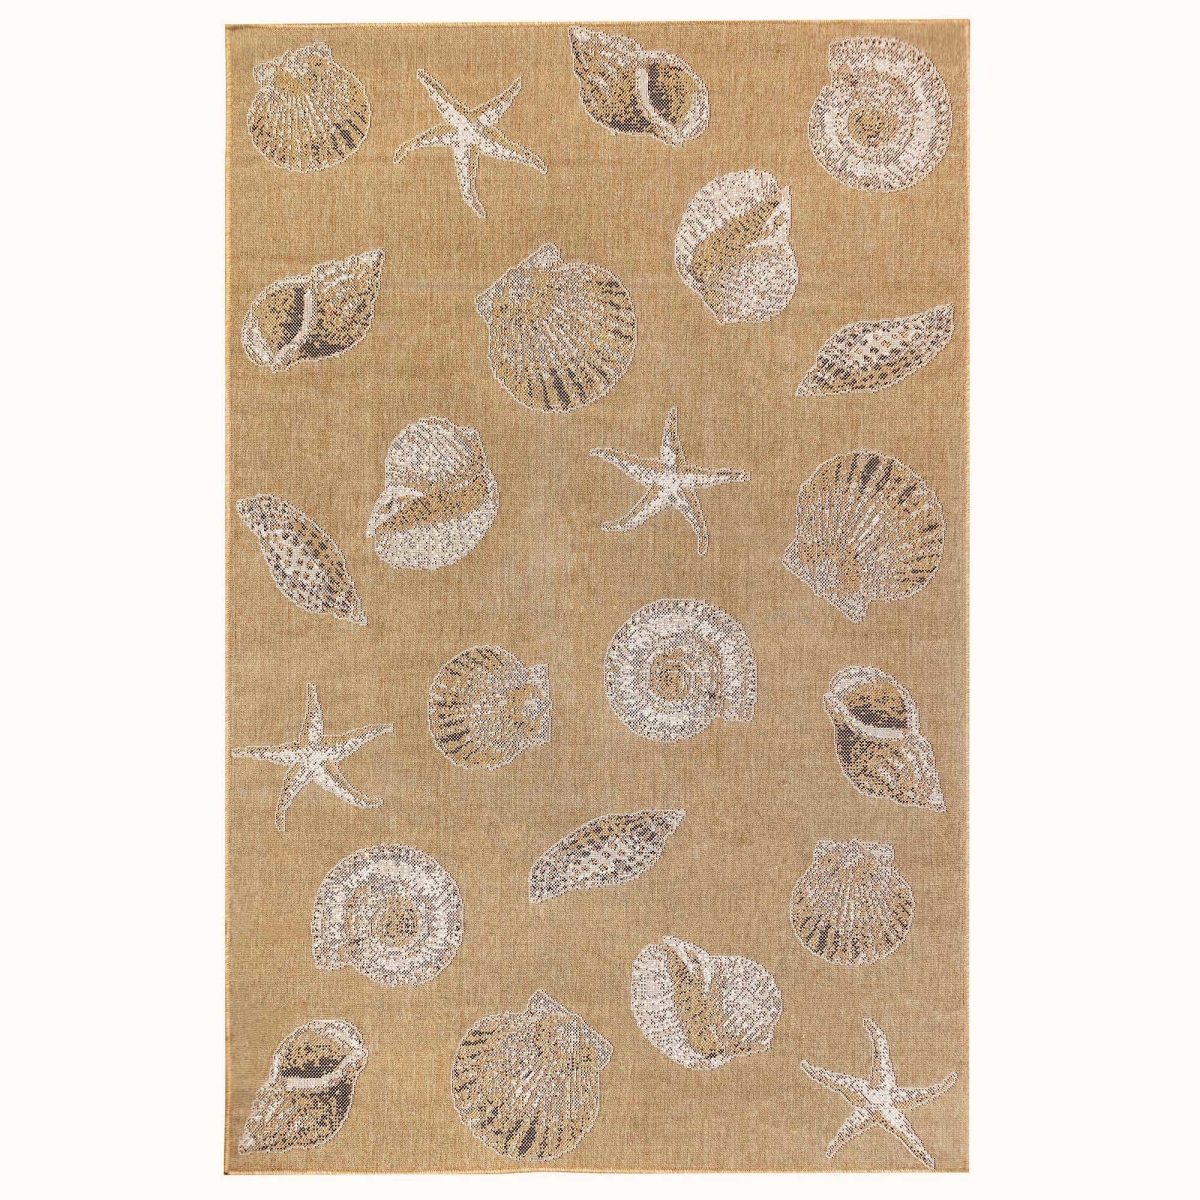 Trans-ocean Imports Cre69841412 6 Ft. 6 In. X 9 Ft. 4 In. Liora Manne Carmel Shells Indoor & Outdoor Rug Wilton Woven Rug - Sand